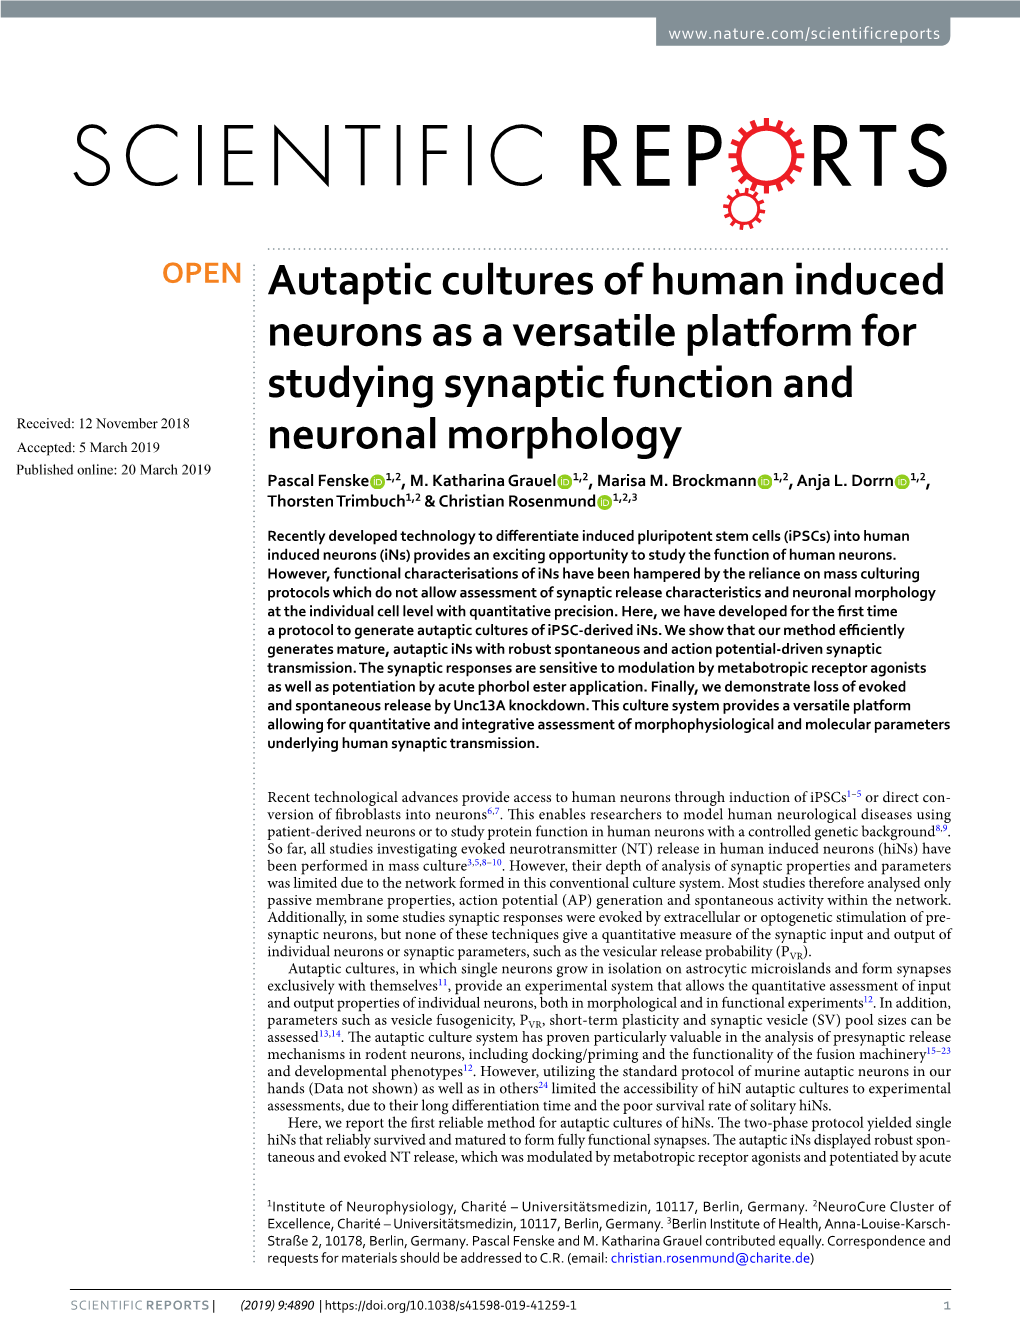 Autaptic Cultures of Human Induced Neurons As a Versatile Platform For